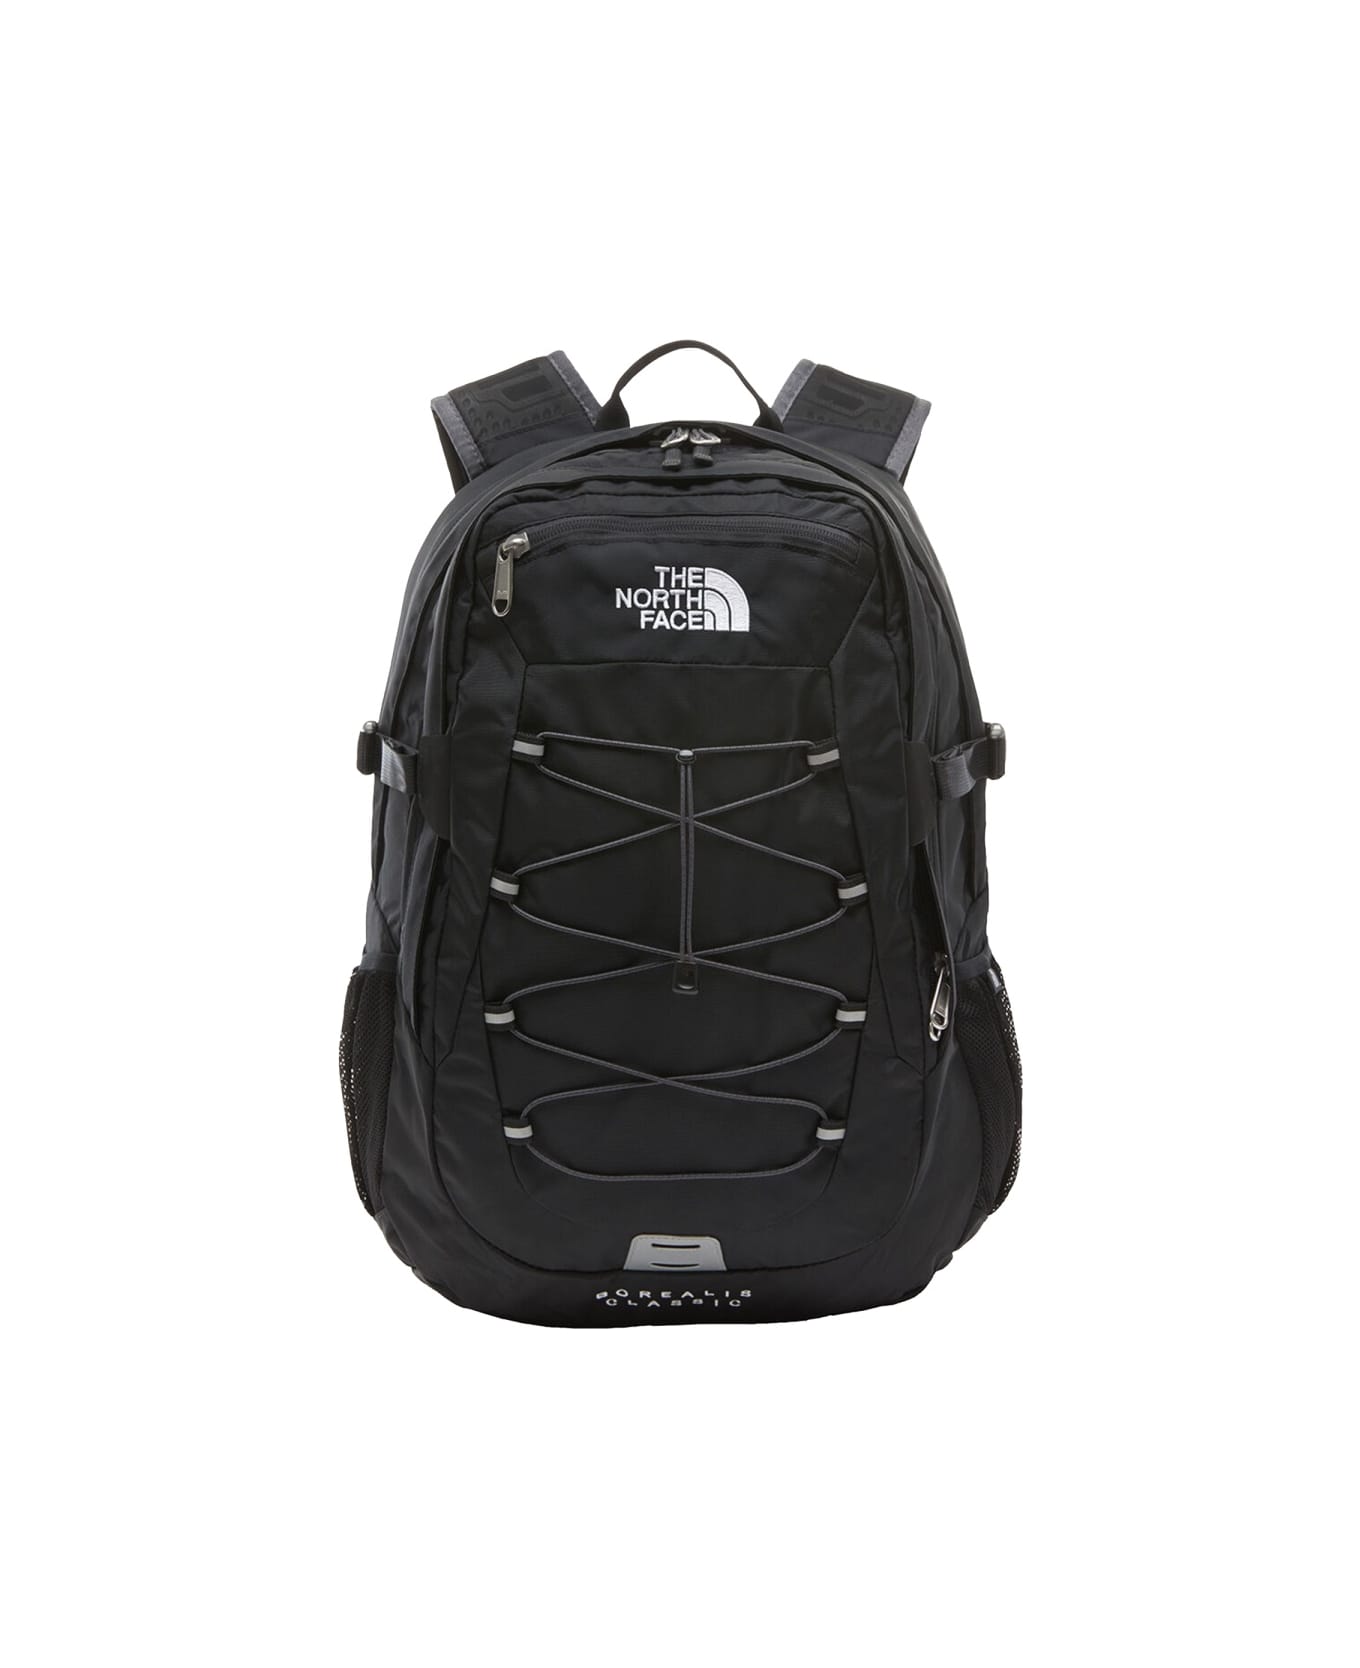 The North Face Borealis Classic Backpack - BLACK バックパック